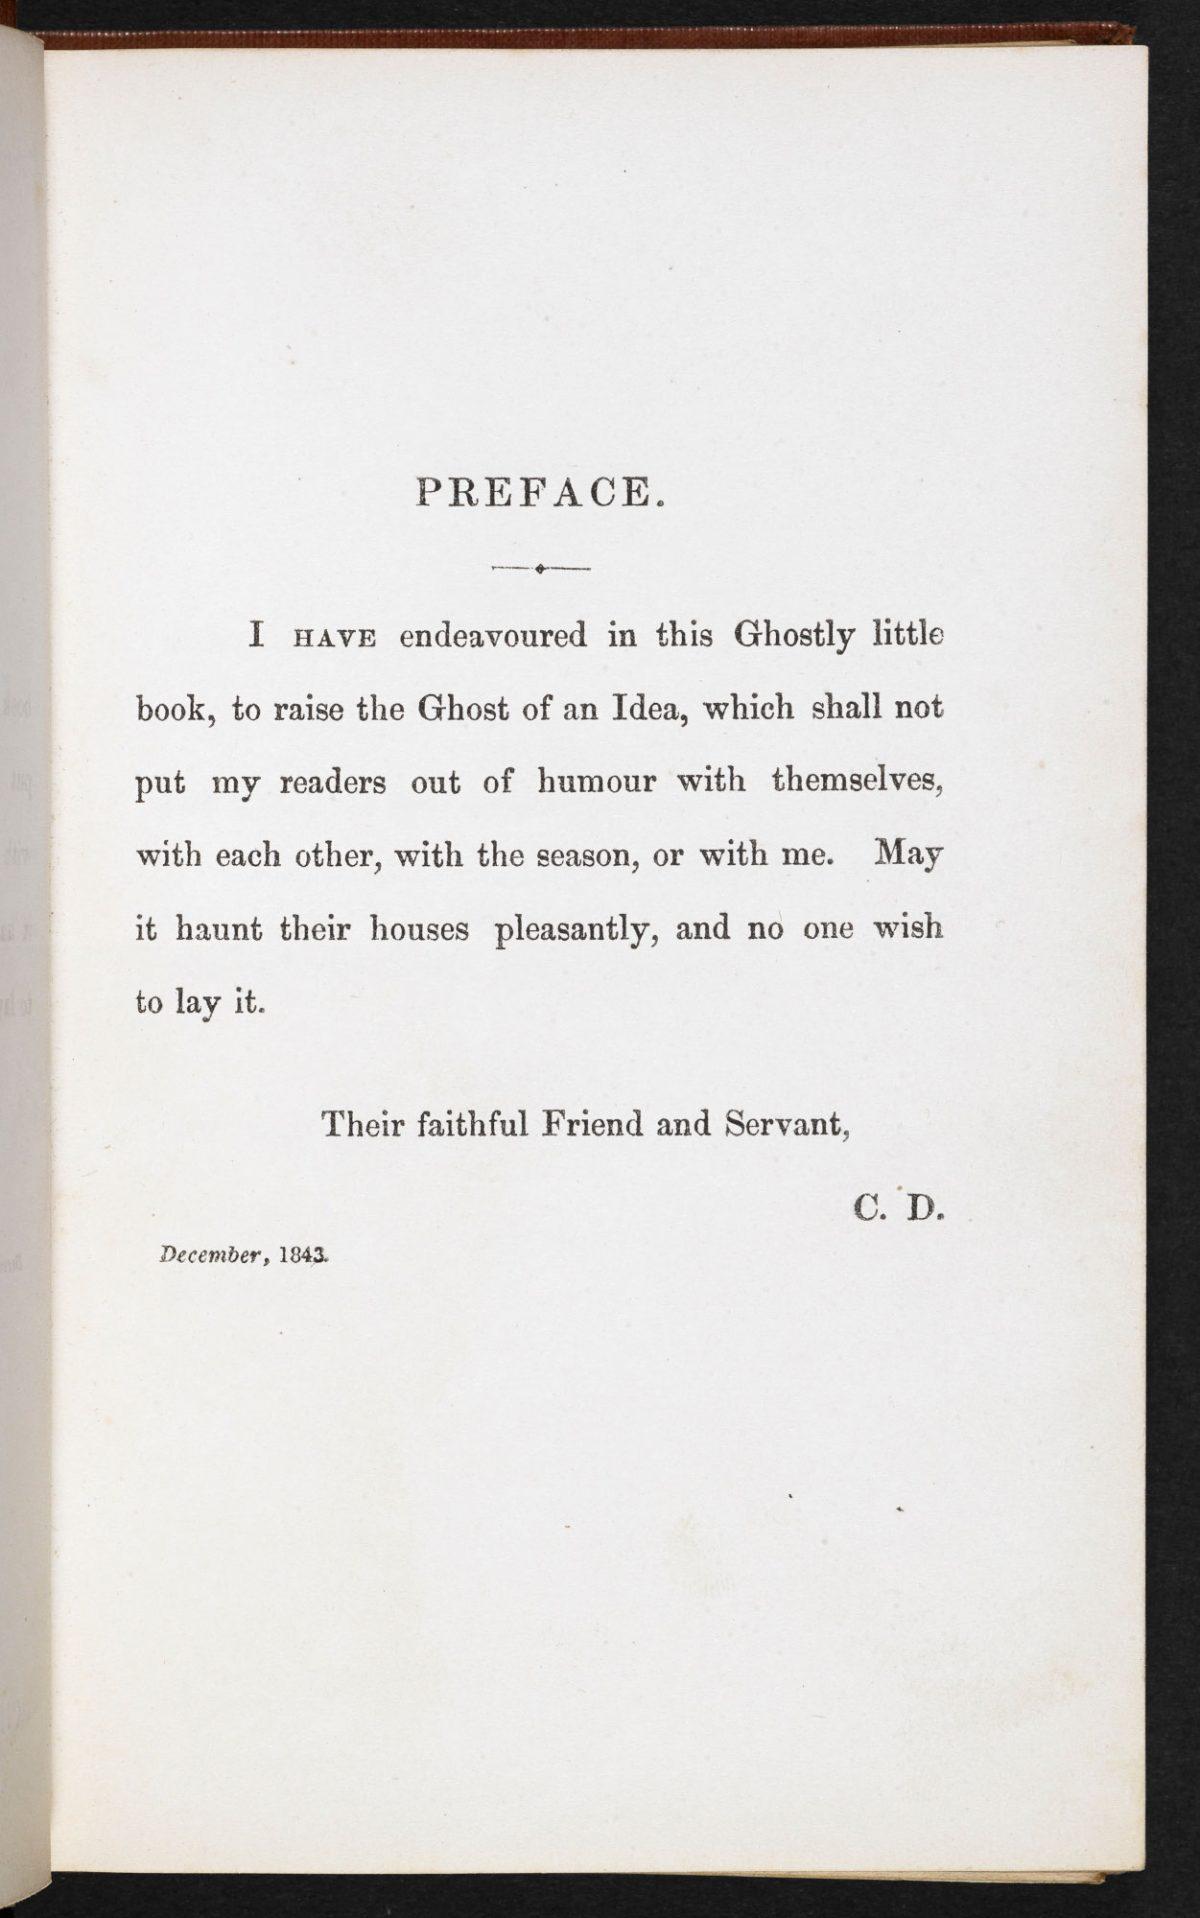 Preface to the first edition of “A Christmas Carol in Prose: Being a Ghost Story of Christmas,” 1843, by Charles Dickens. (Public Domain)